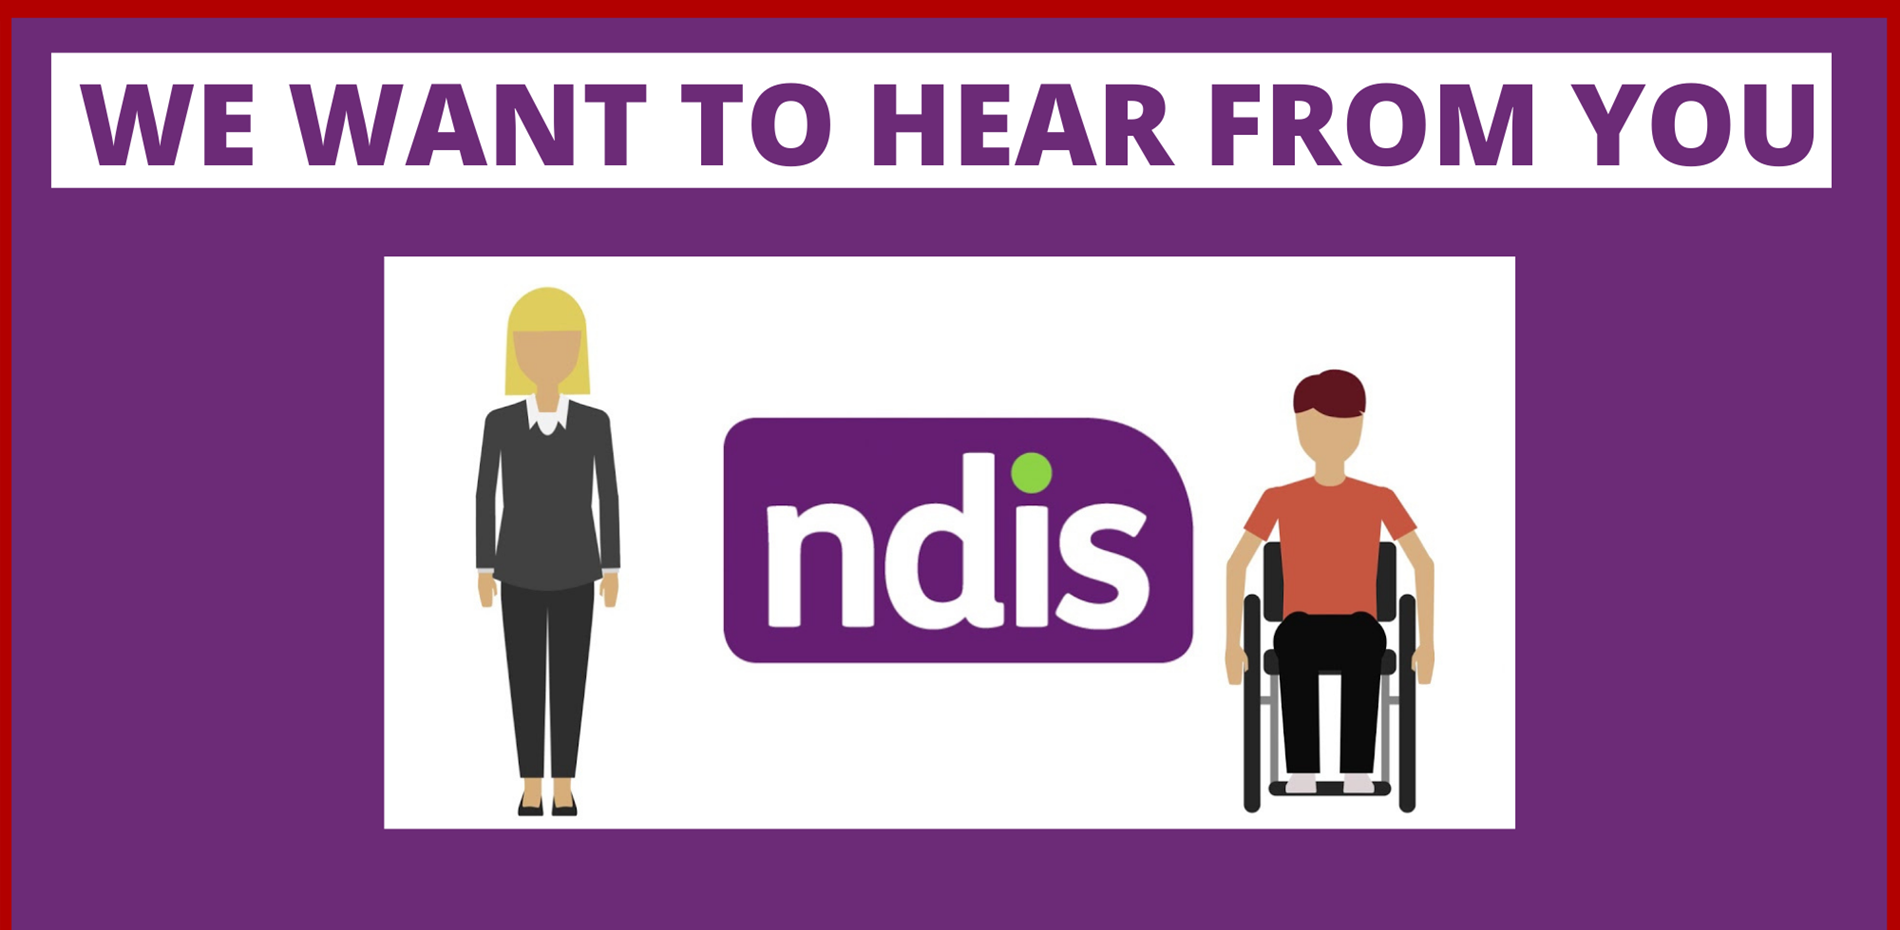 Have your say on the NDIS Main Image